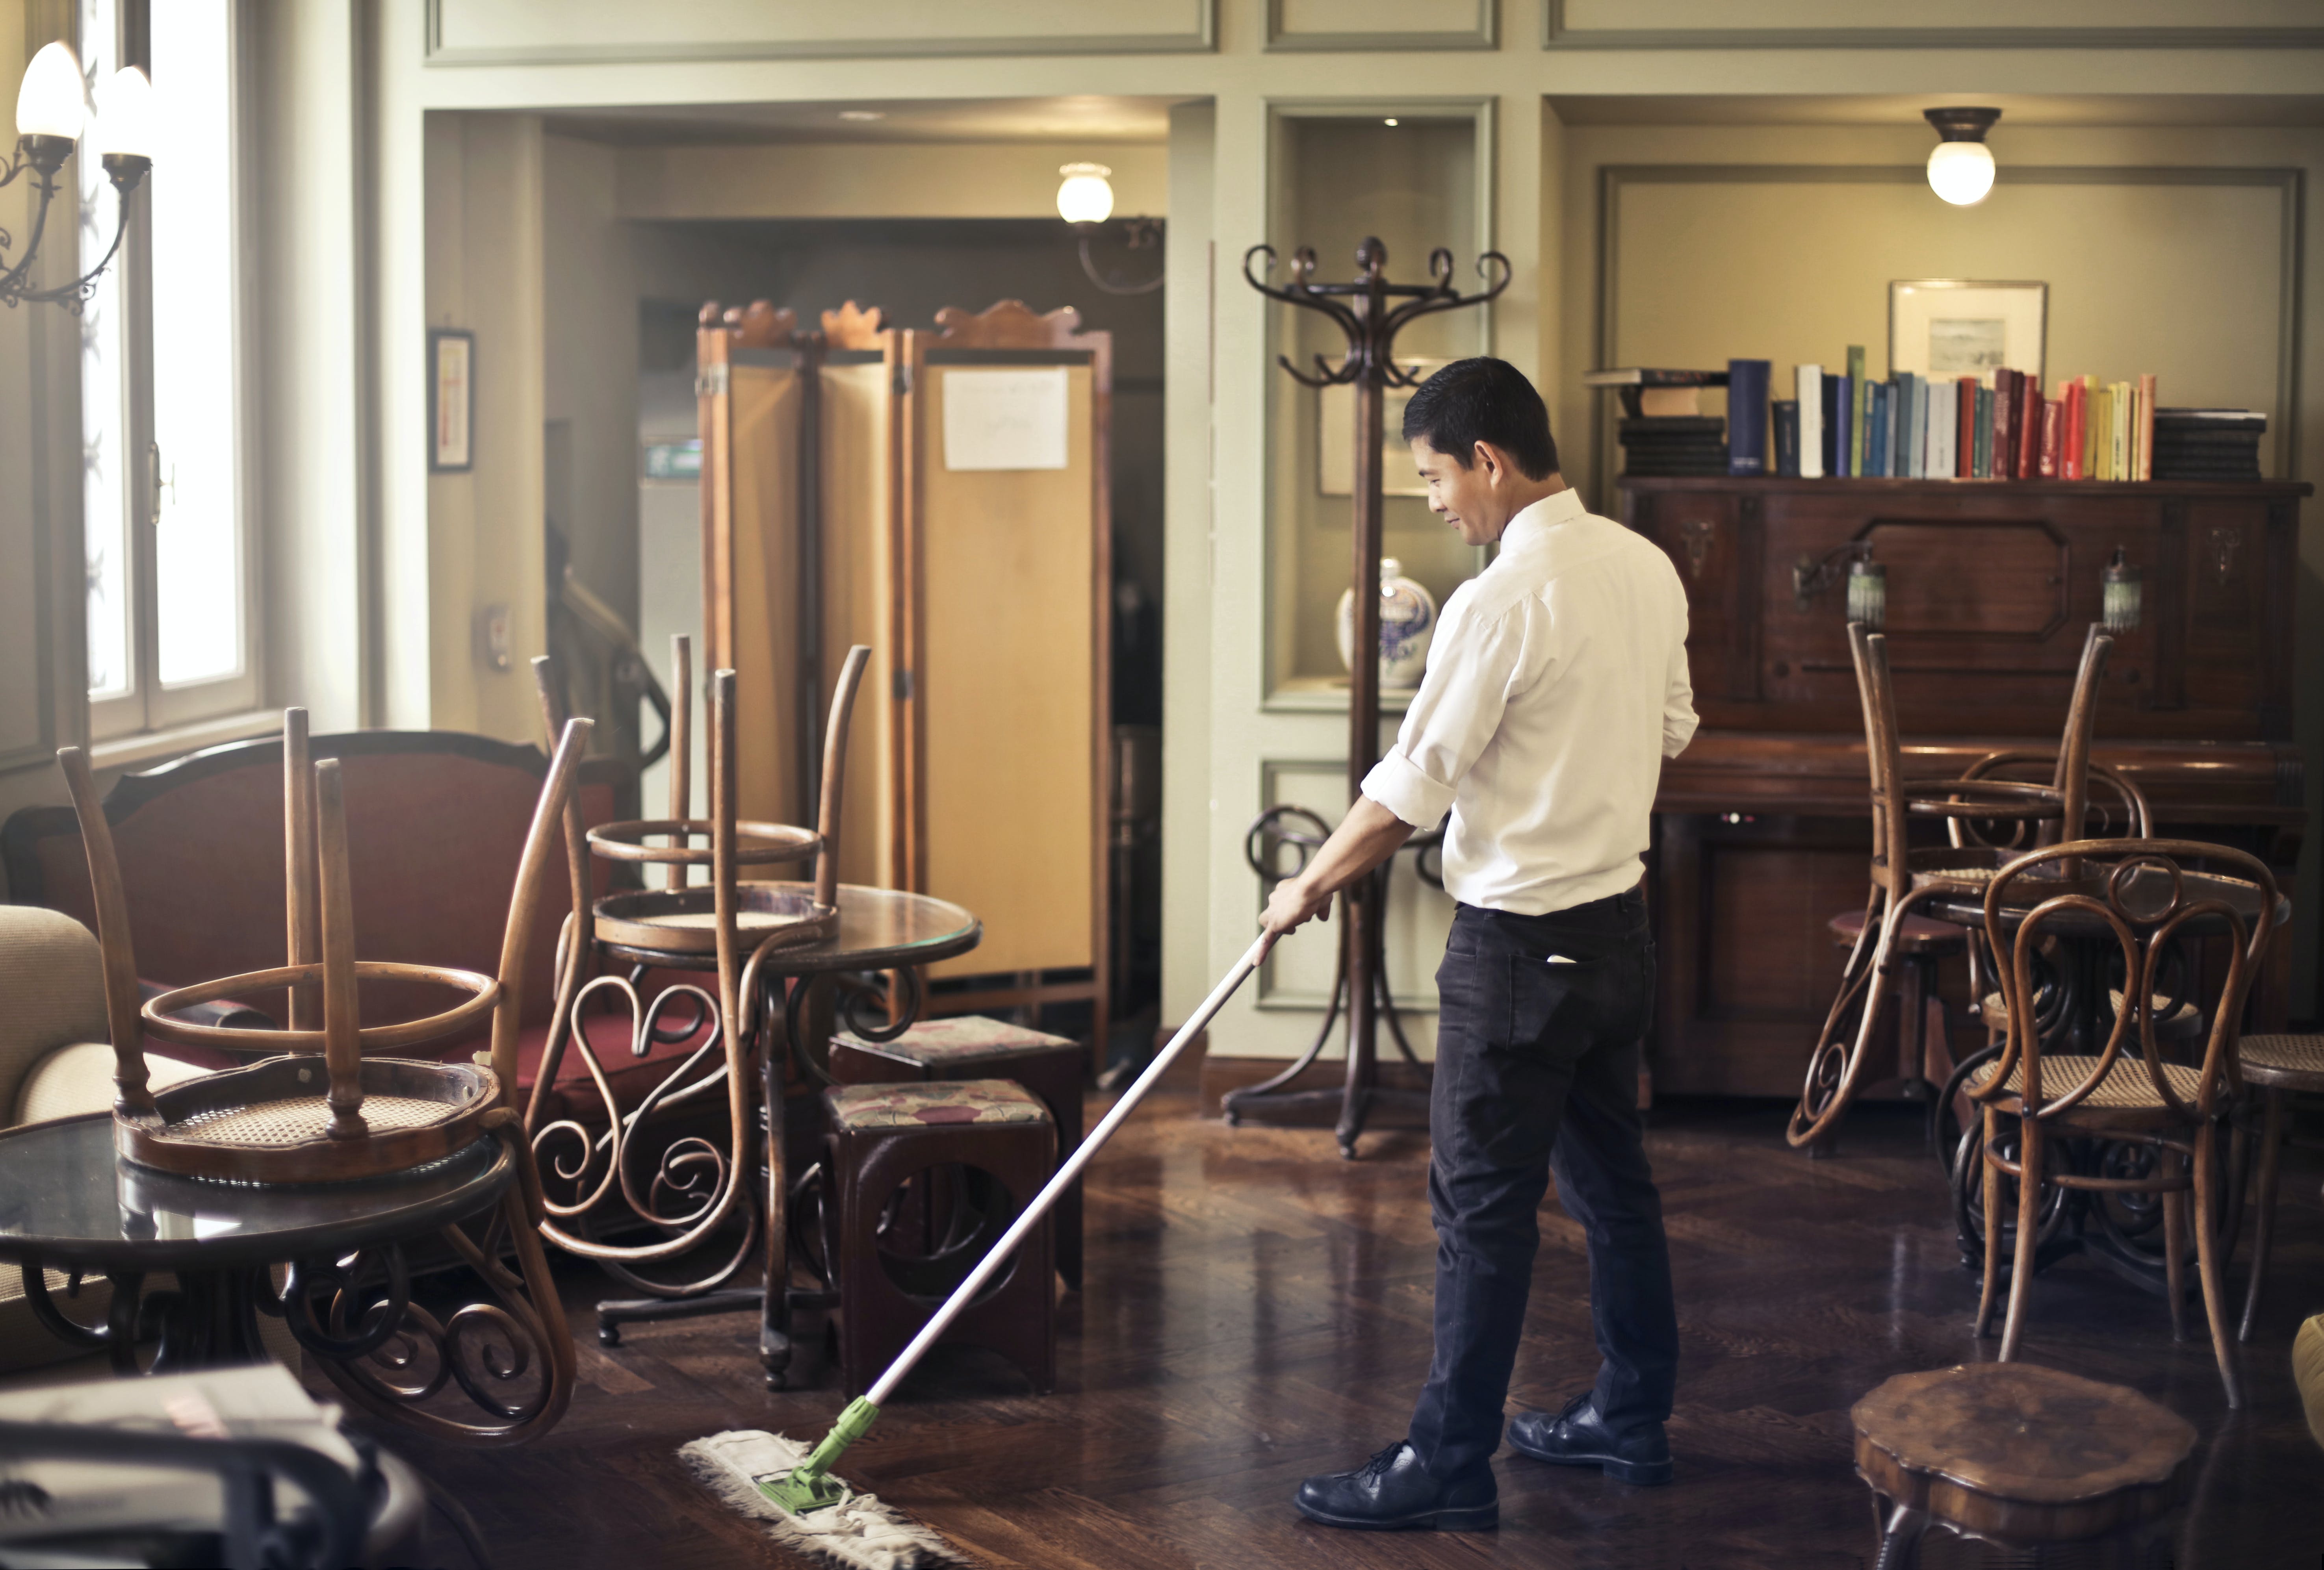 A restaurant worker cleaning up | Source: Pexels